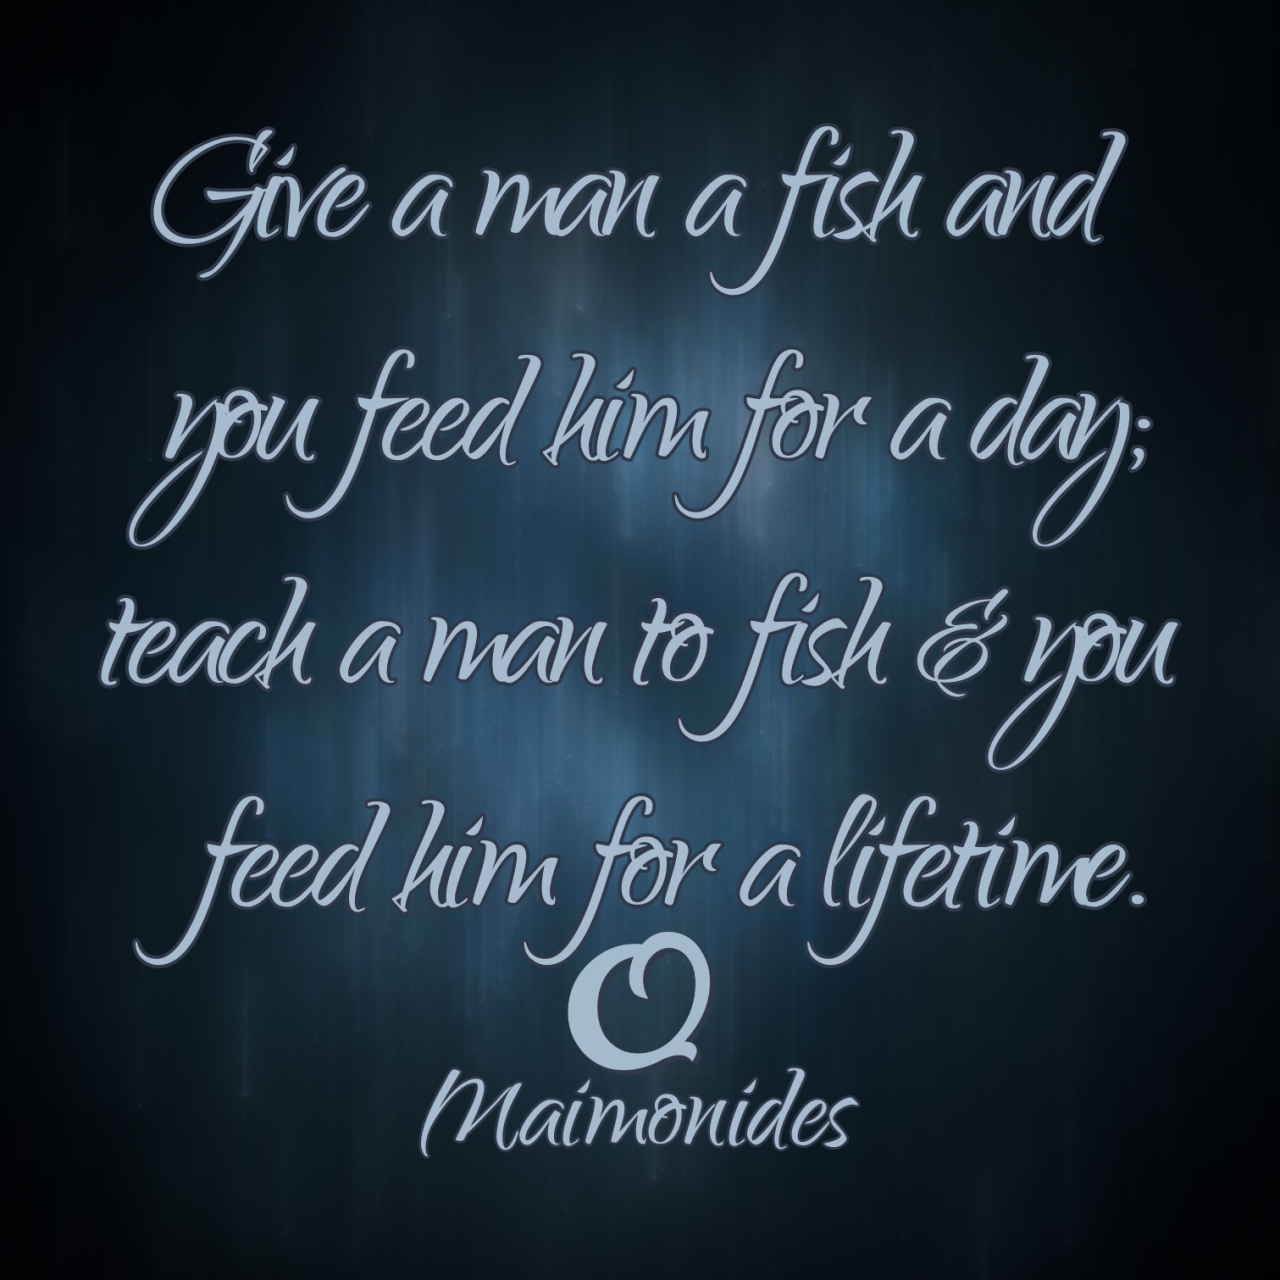 Maimonides “Give a man a fish and you feed him for - Truth of